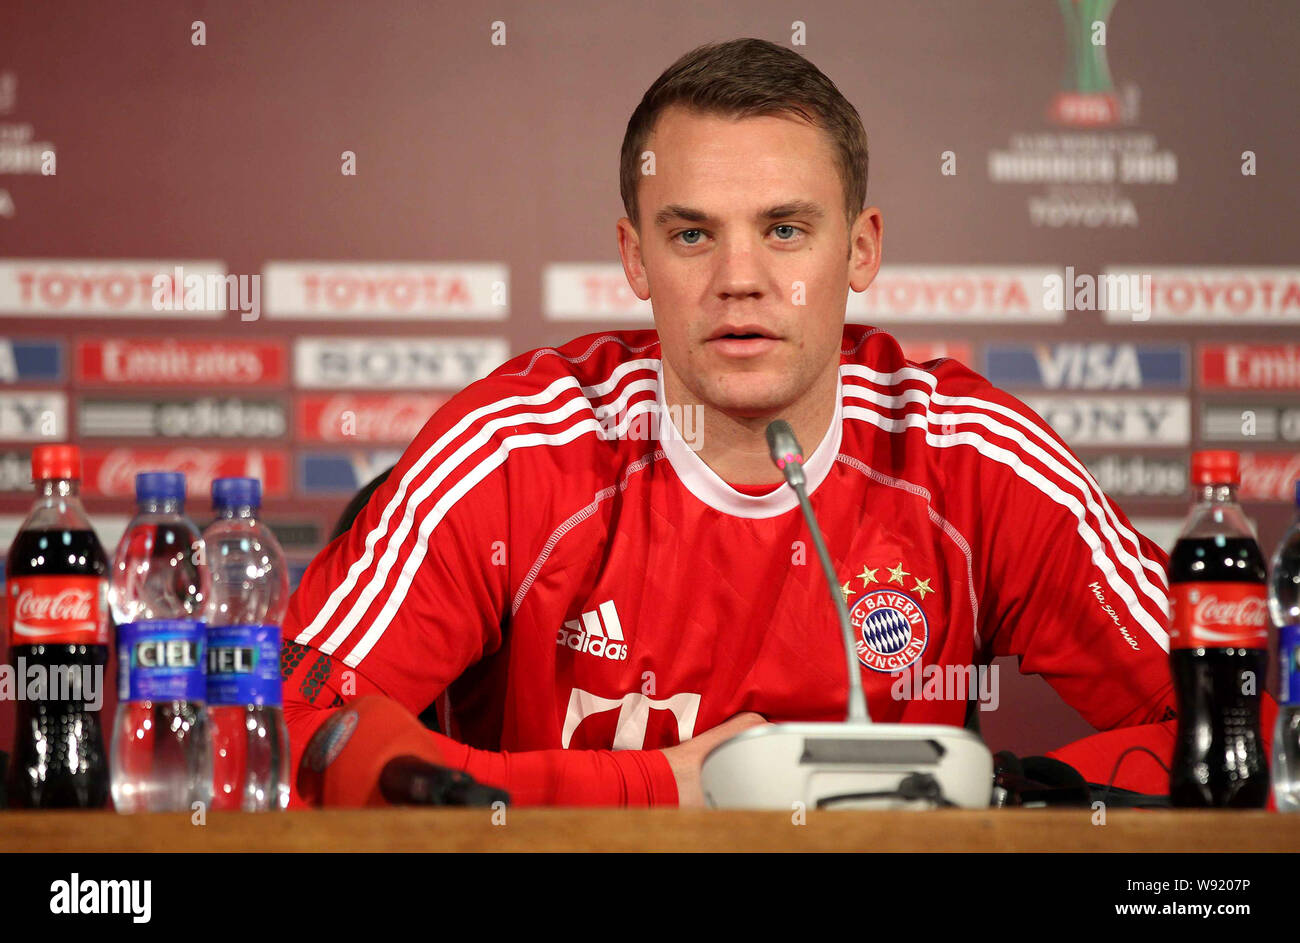 Goalkeeper Manuel Neuer of Germanys Bayern Munich speaks at a press conference during the 2013 FIFA Club World Cup in Agadir, Morocco, 15 December 201 Stock Photo